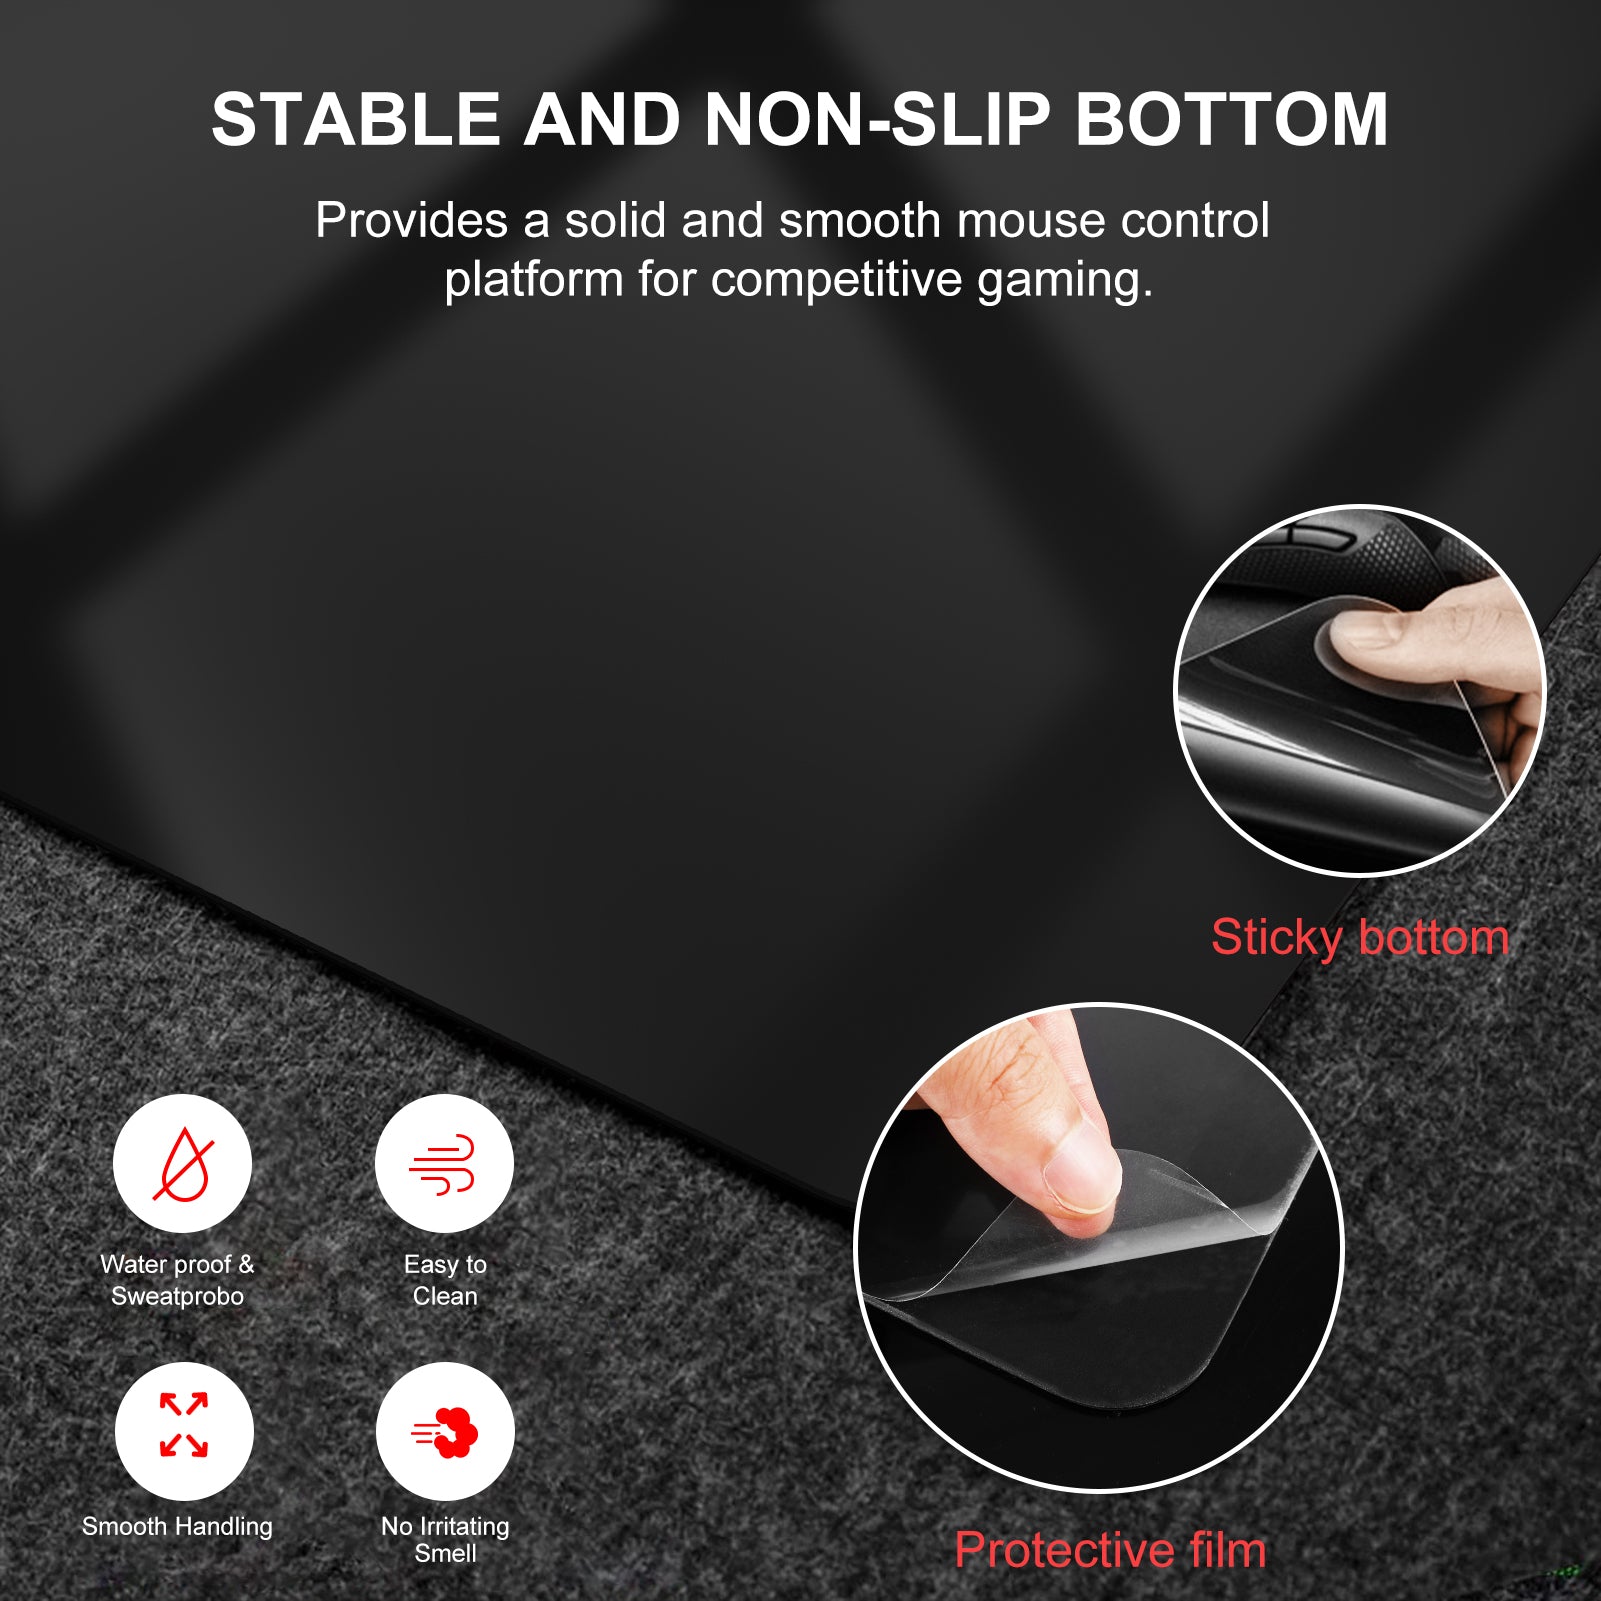 NPET SPEEDM Gaming Mousepad - Resin Surface Hard Gaming Mouse pad,Balanced Control & Speed, No Smell Waterproof Mouse Mat for Esports Gamers [Hard/Fast] Grey, Large